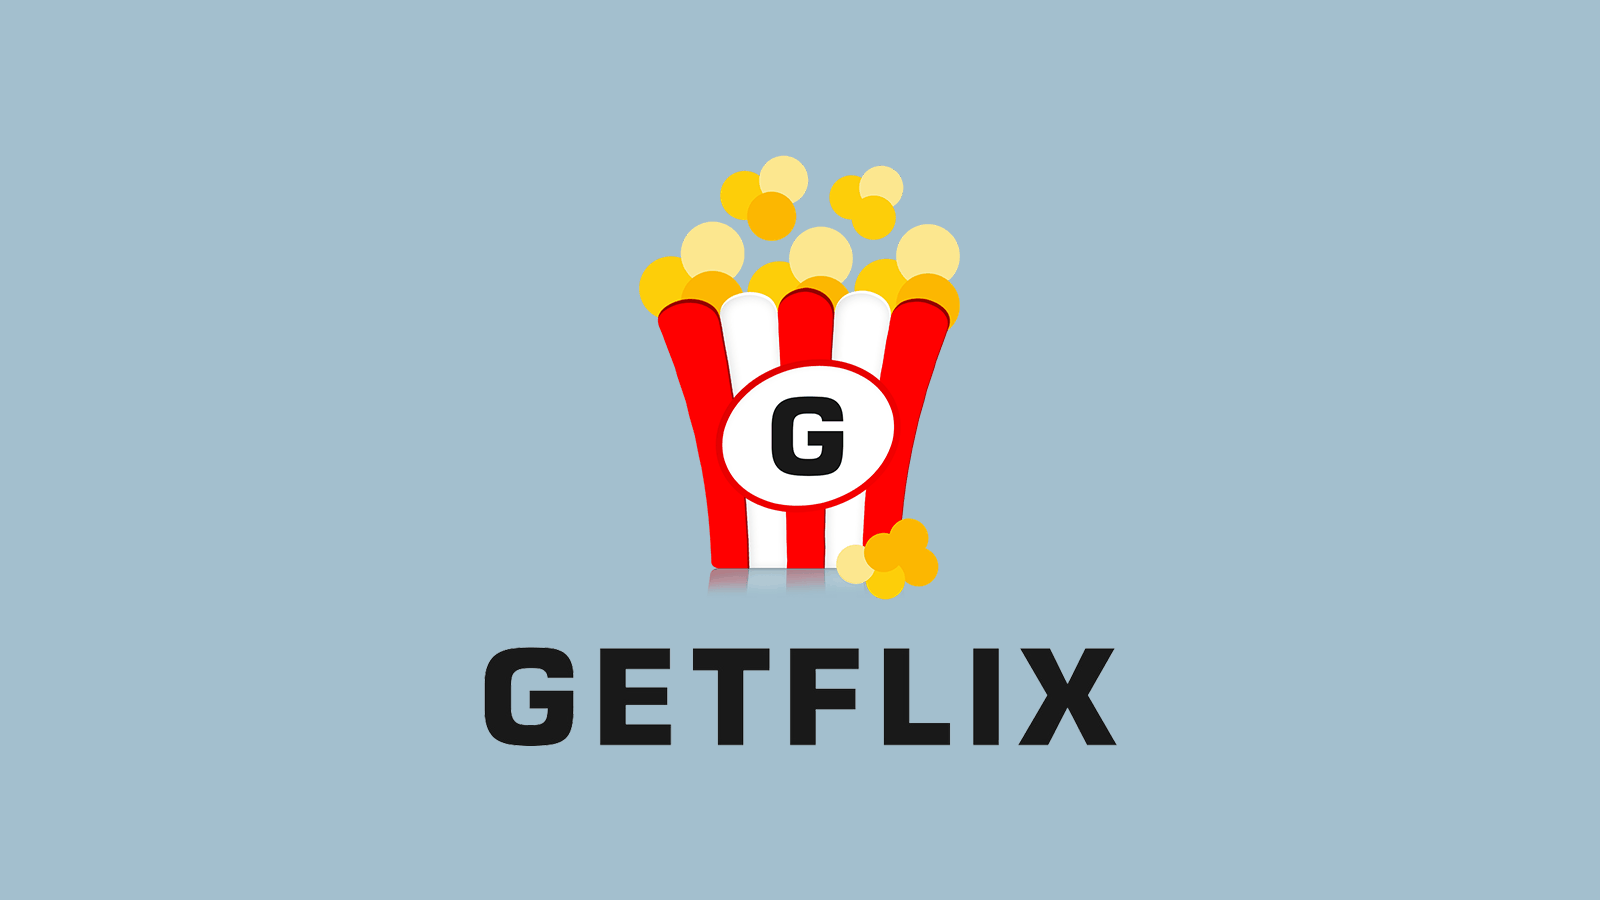 Getflix Smart Dns Vpn Review 2019 Avoid This Vpn At All Costs Images, Photos, Reviews